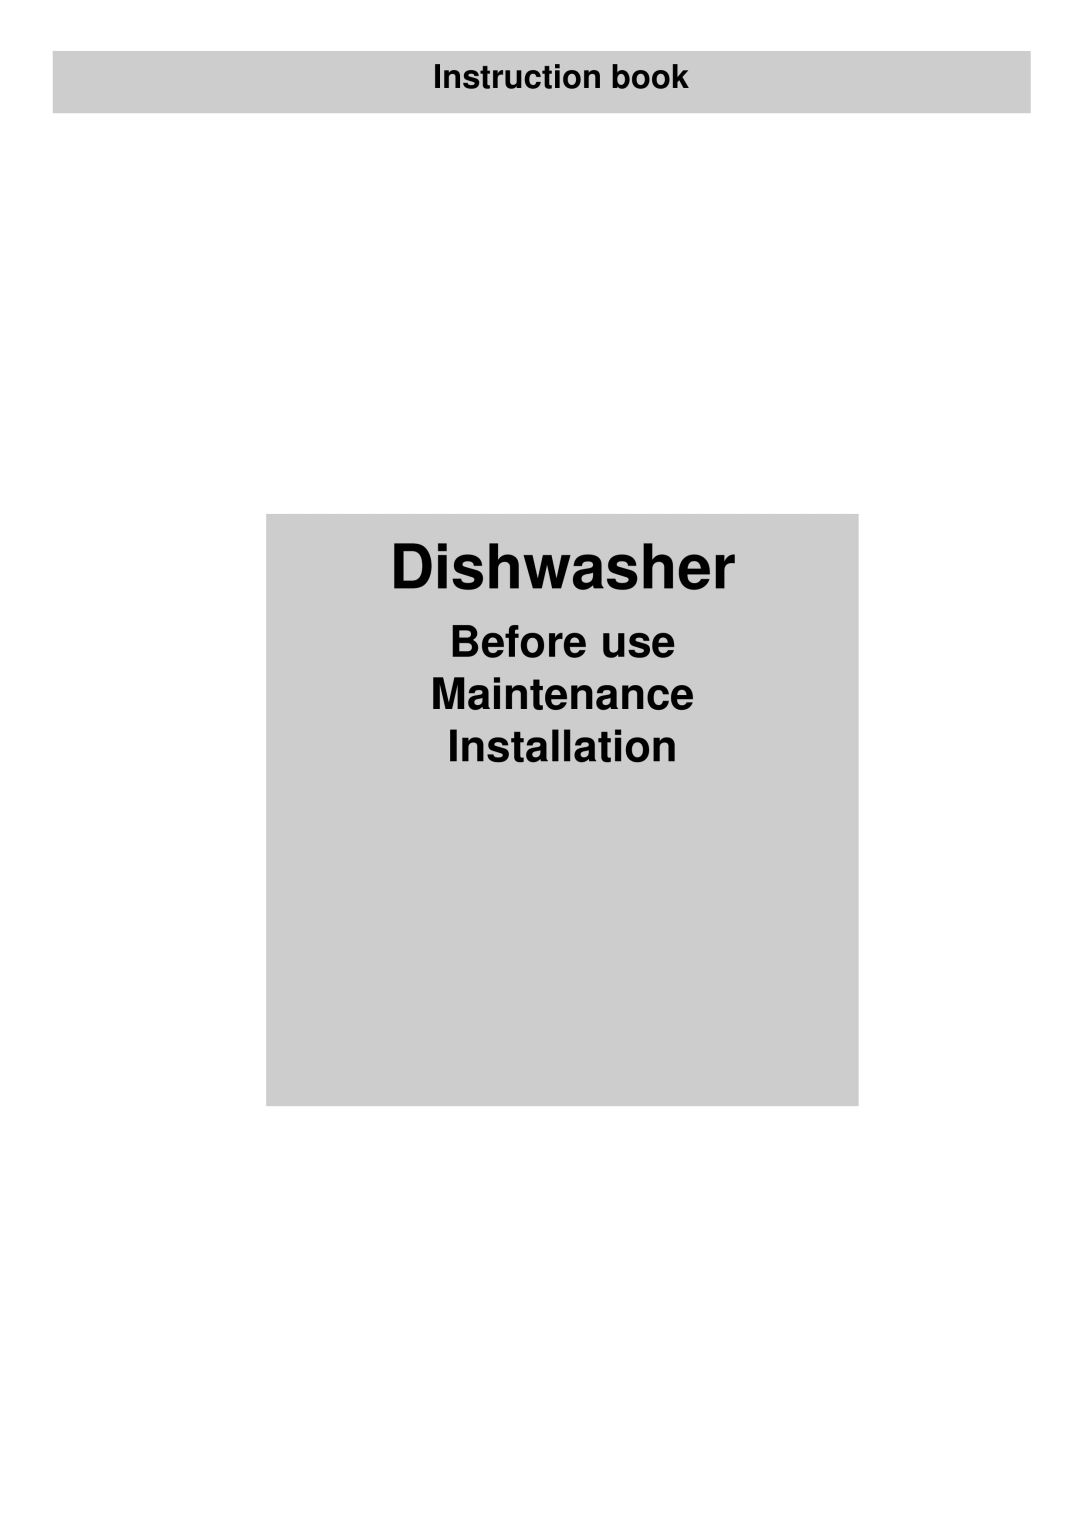 Tricity Bendix DH 103 manual Dishwasher, Before use Maintenance Installation, Instruction book 